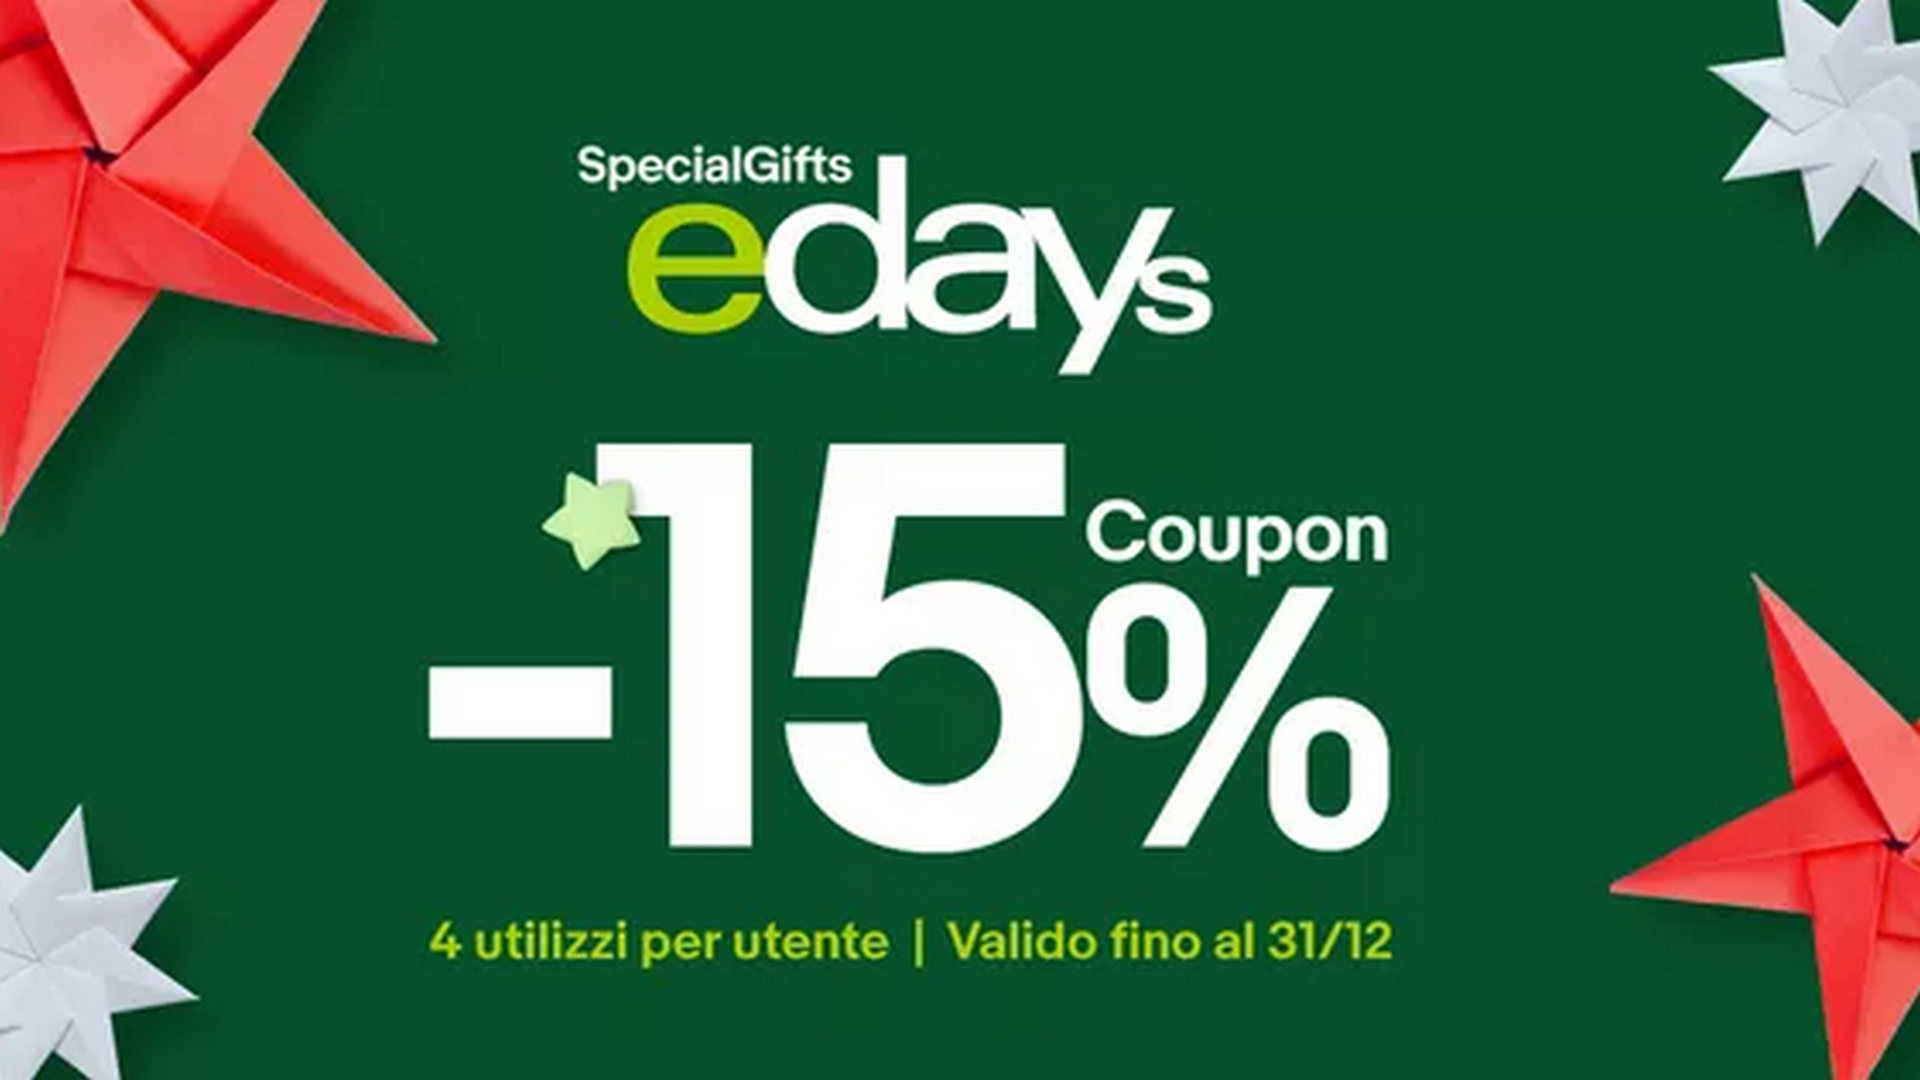 http://Special%20Gift%20eDays%20|%20Arriva%20il%20nuovo%20Coupon%20eBay